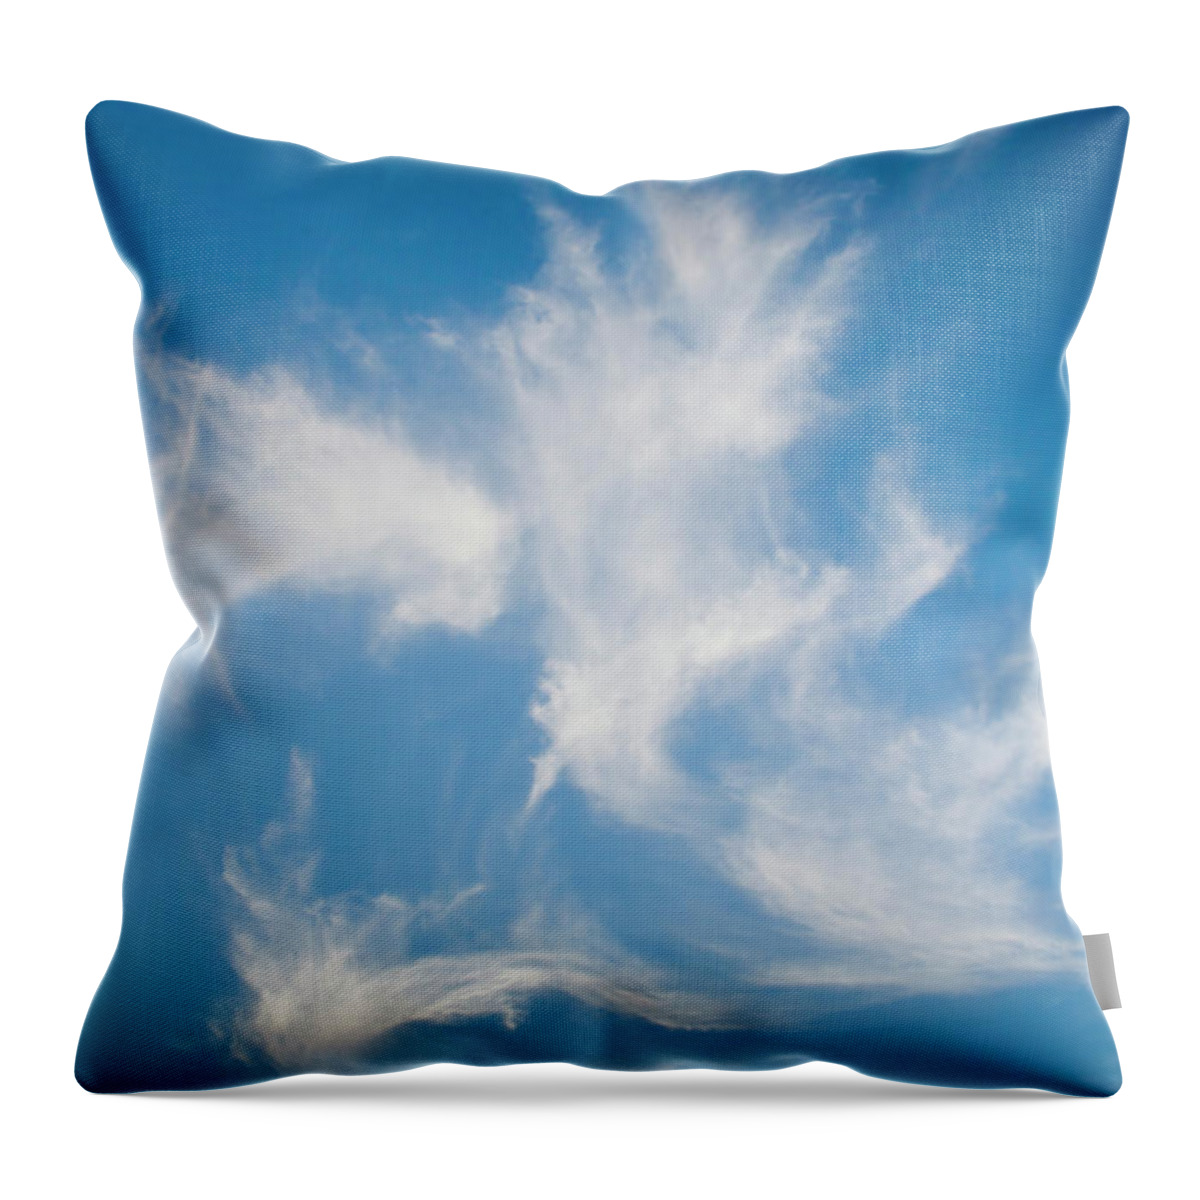 Montana Throw Pillow featuring the photograph High Altitude Cirrus Intortus Clouds In by Laurance B. Aiuppy